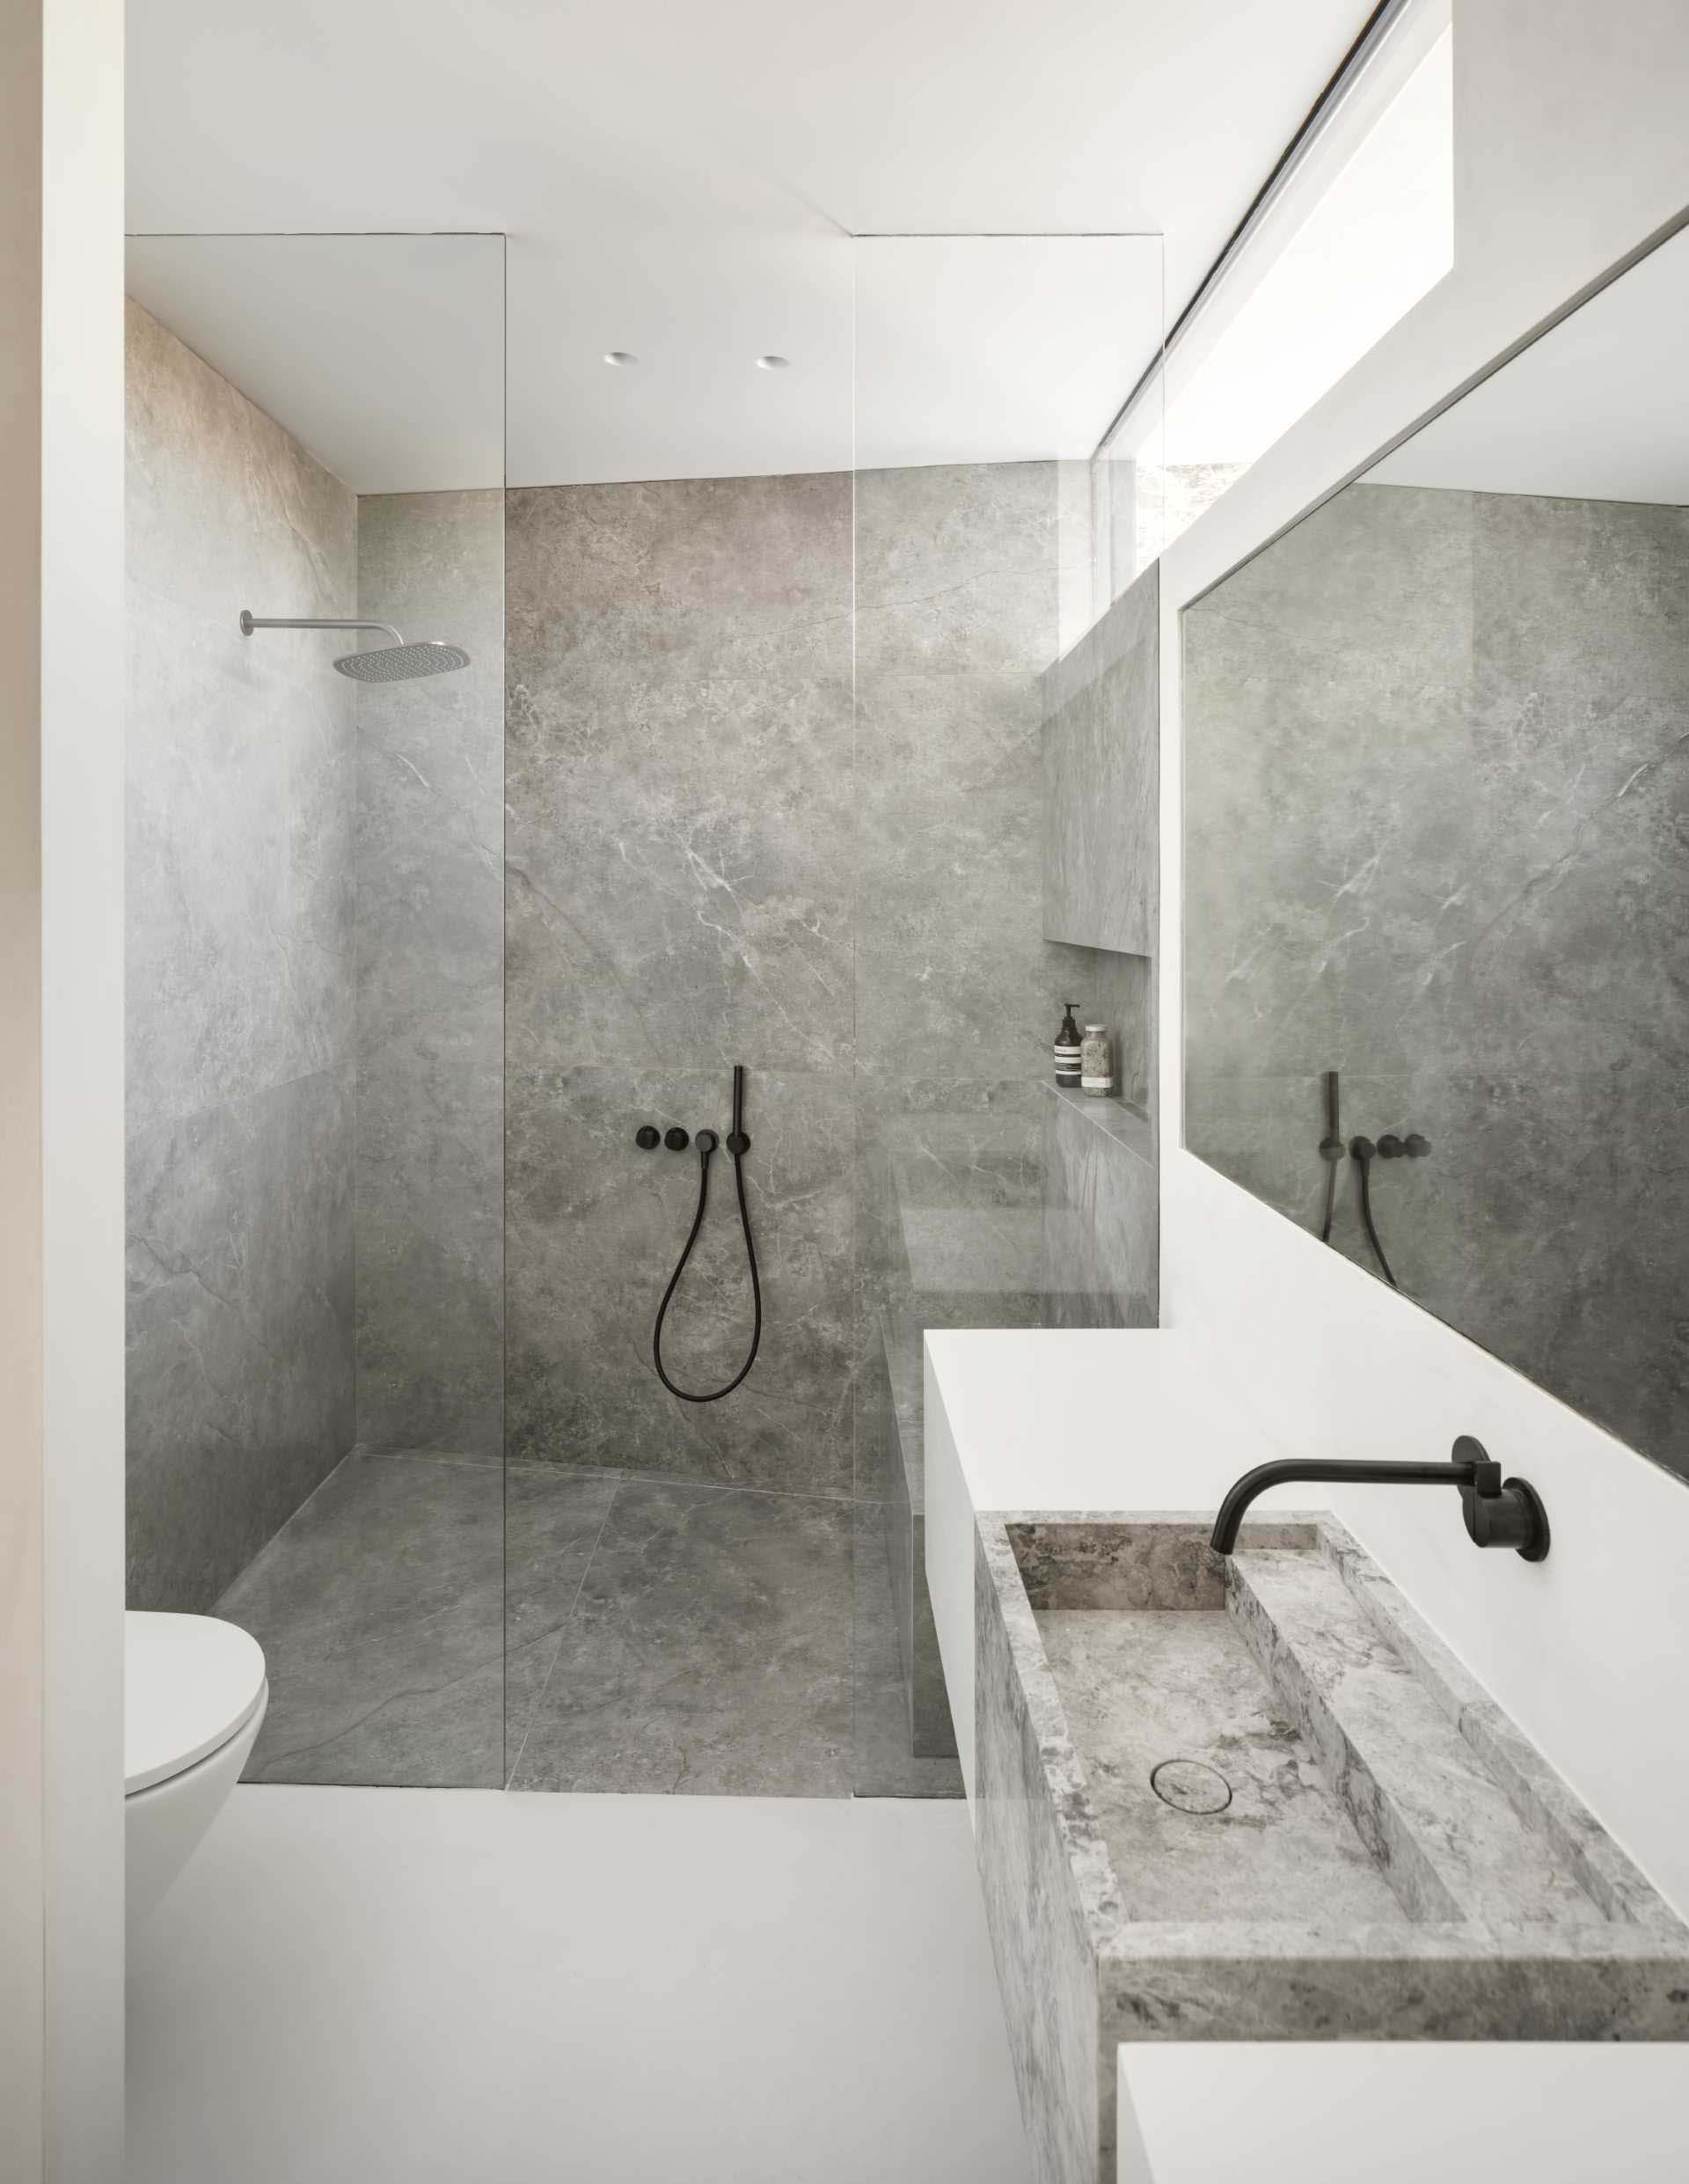 In this modern bathroom, there's a walk-in shower with a built-in bench and a secondary shelving niche.